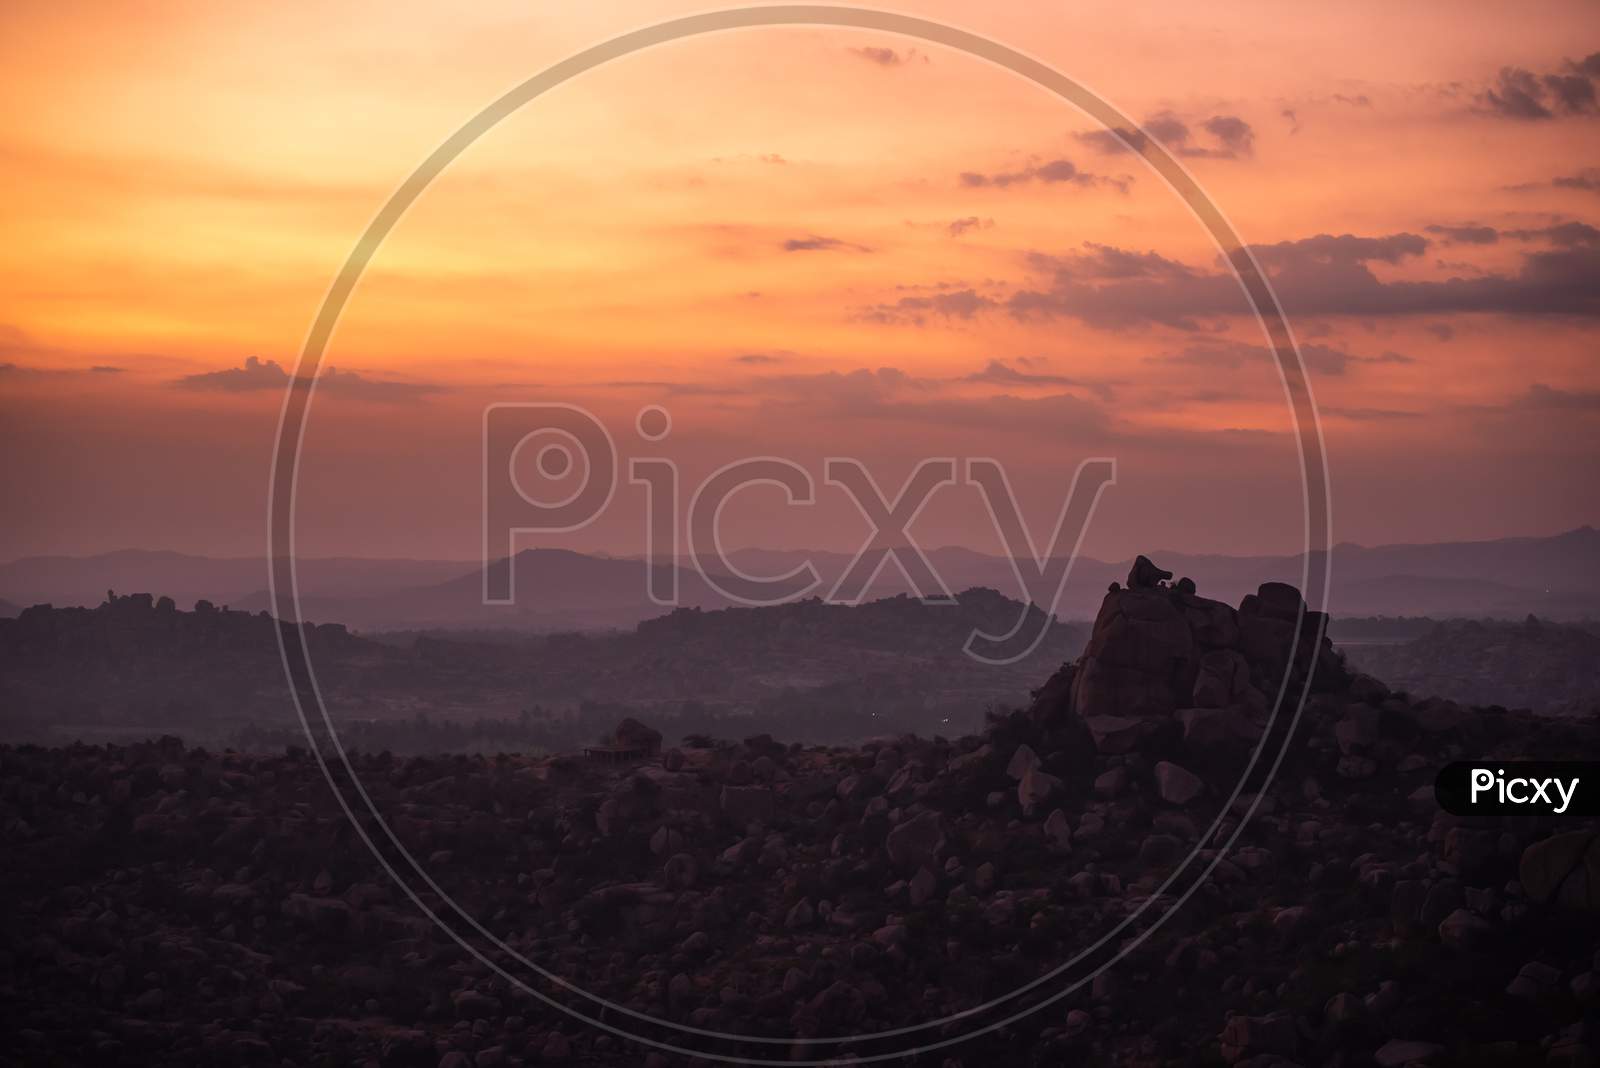 Mountains with Sunset Sky in Hampi